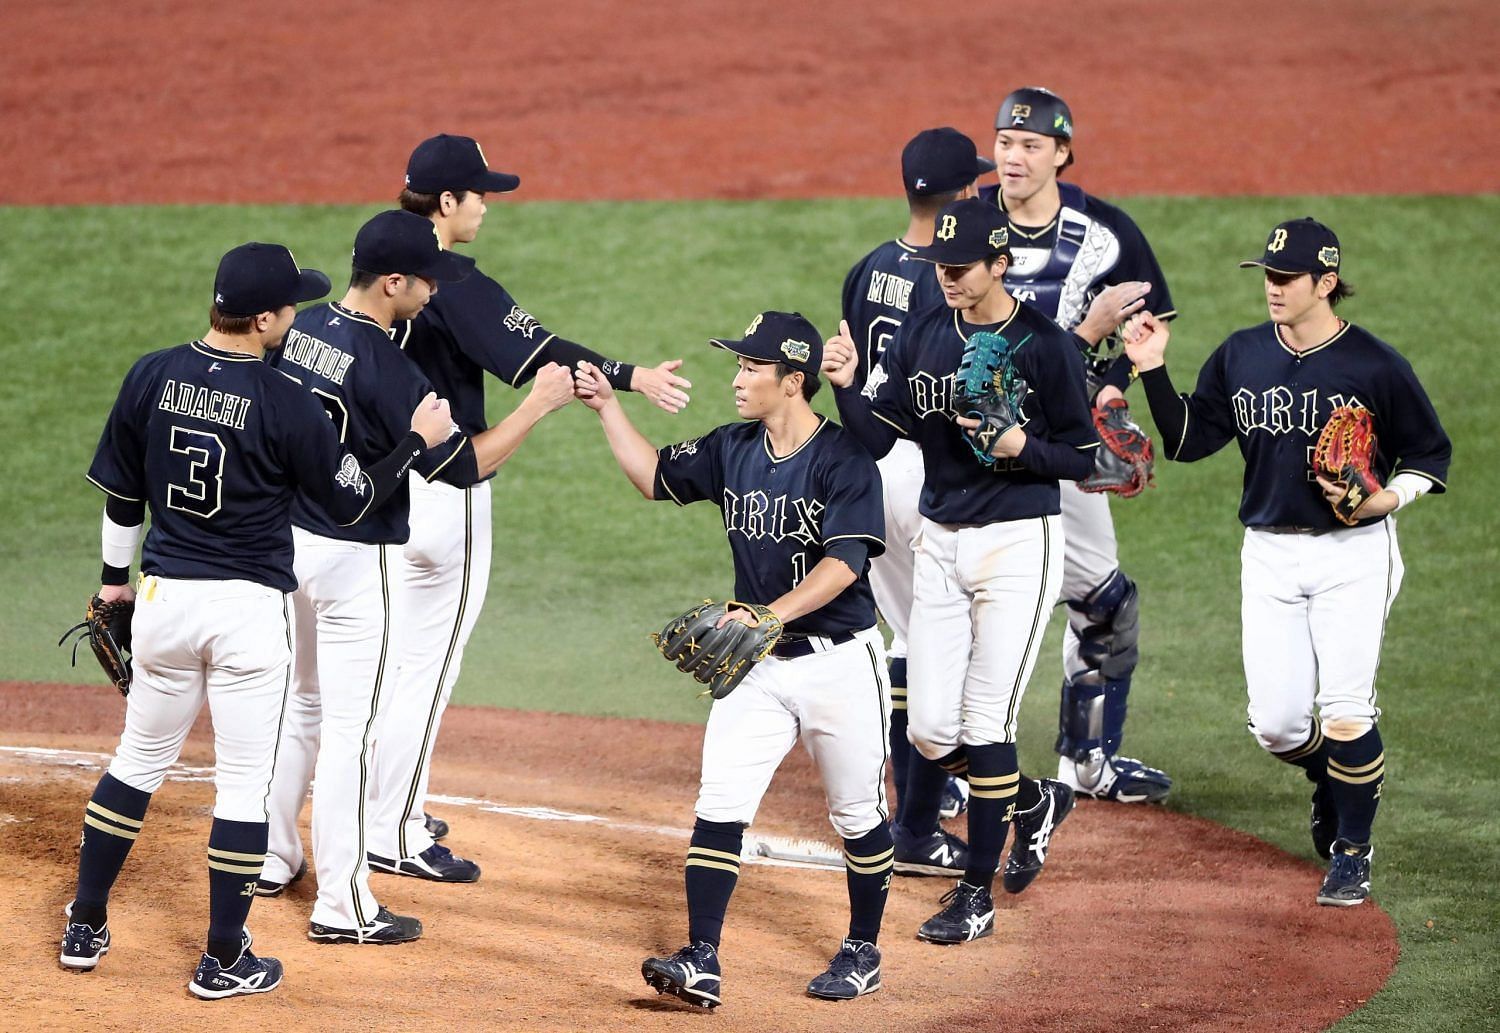 The Buffaloes celebrate after a win. (Image from Sankei)